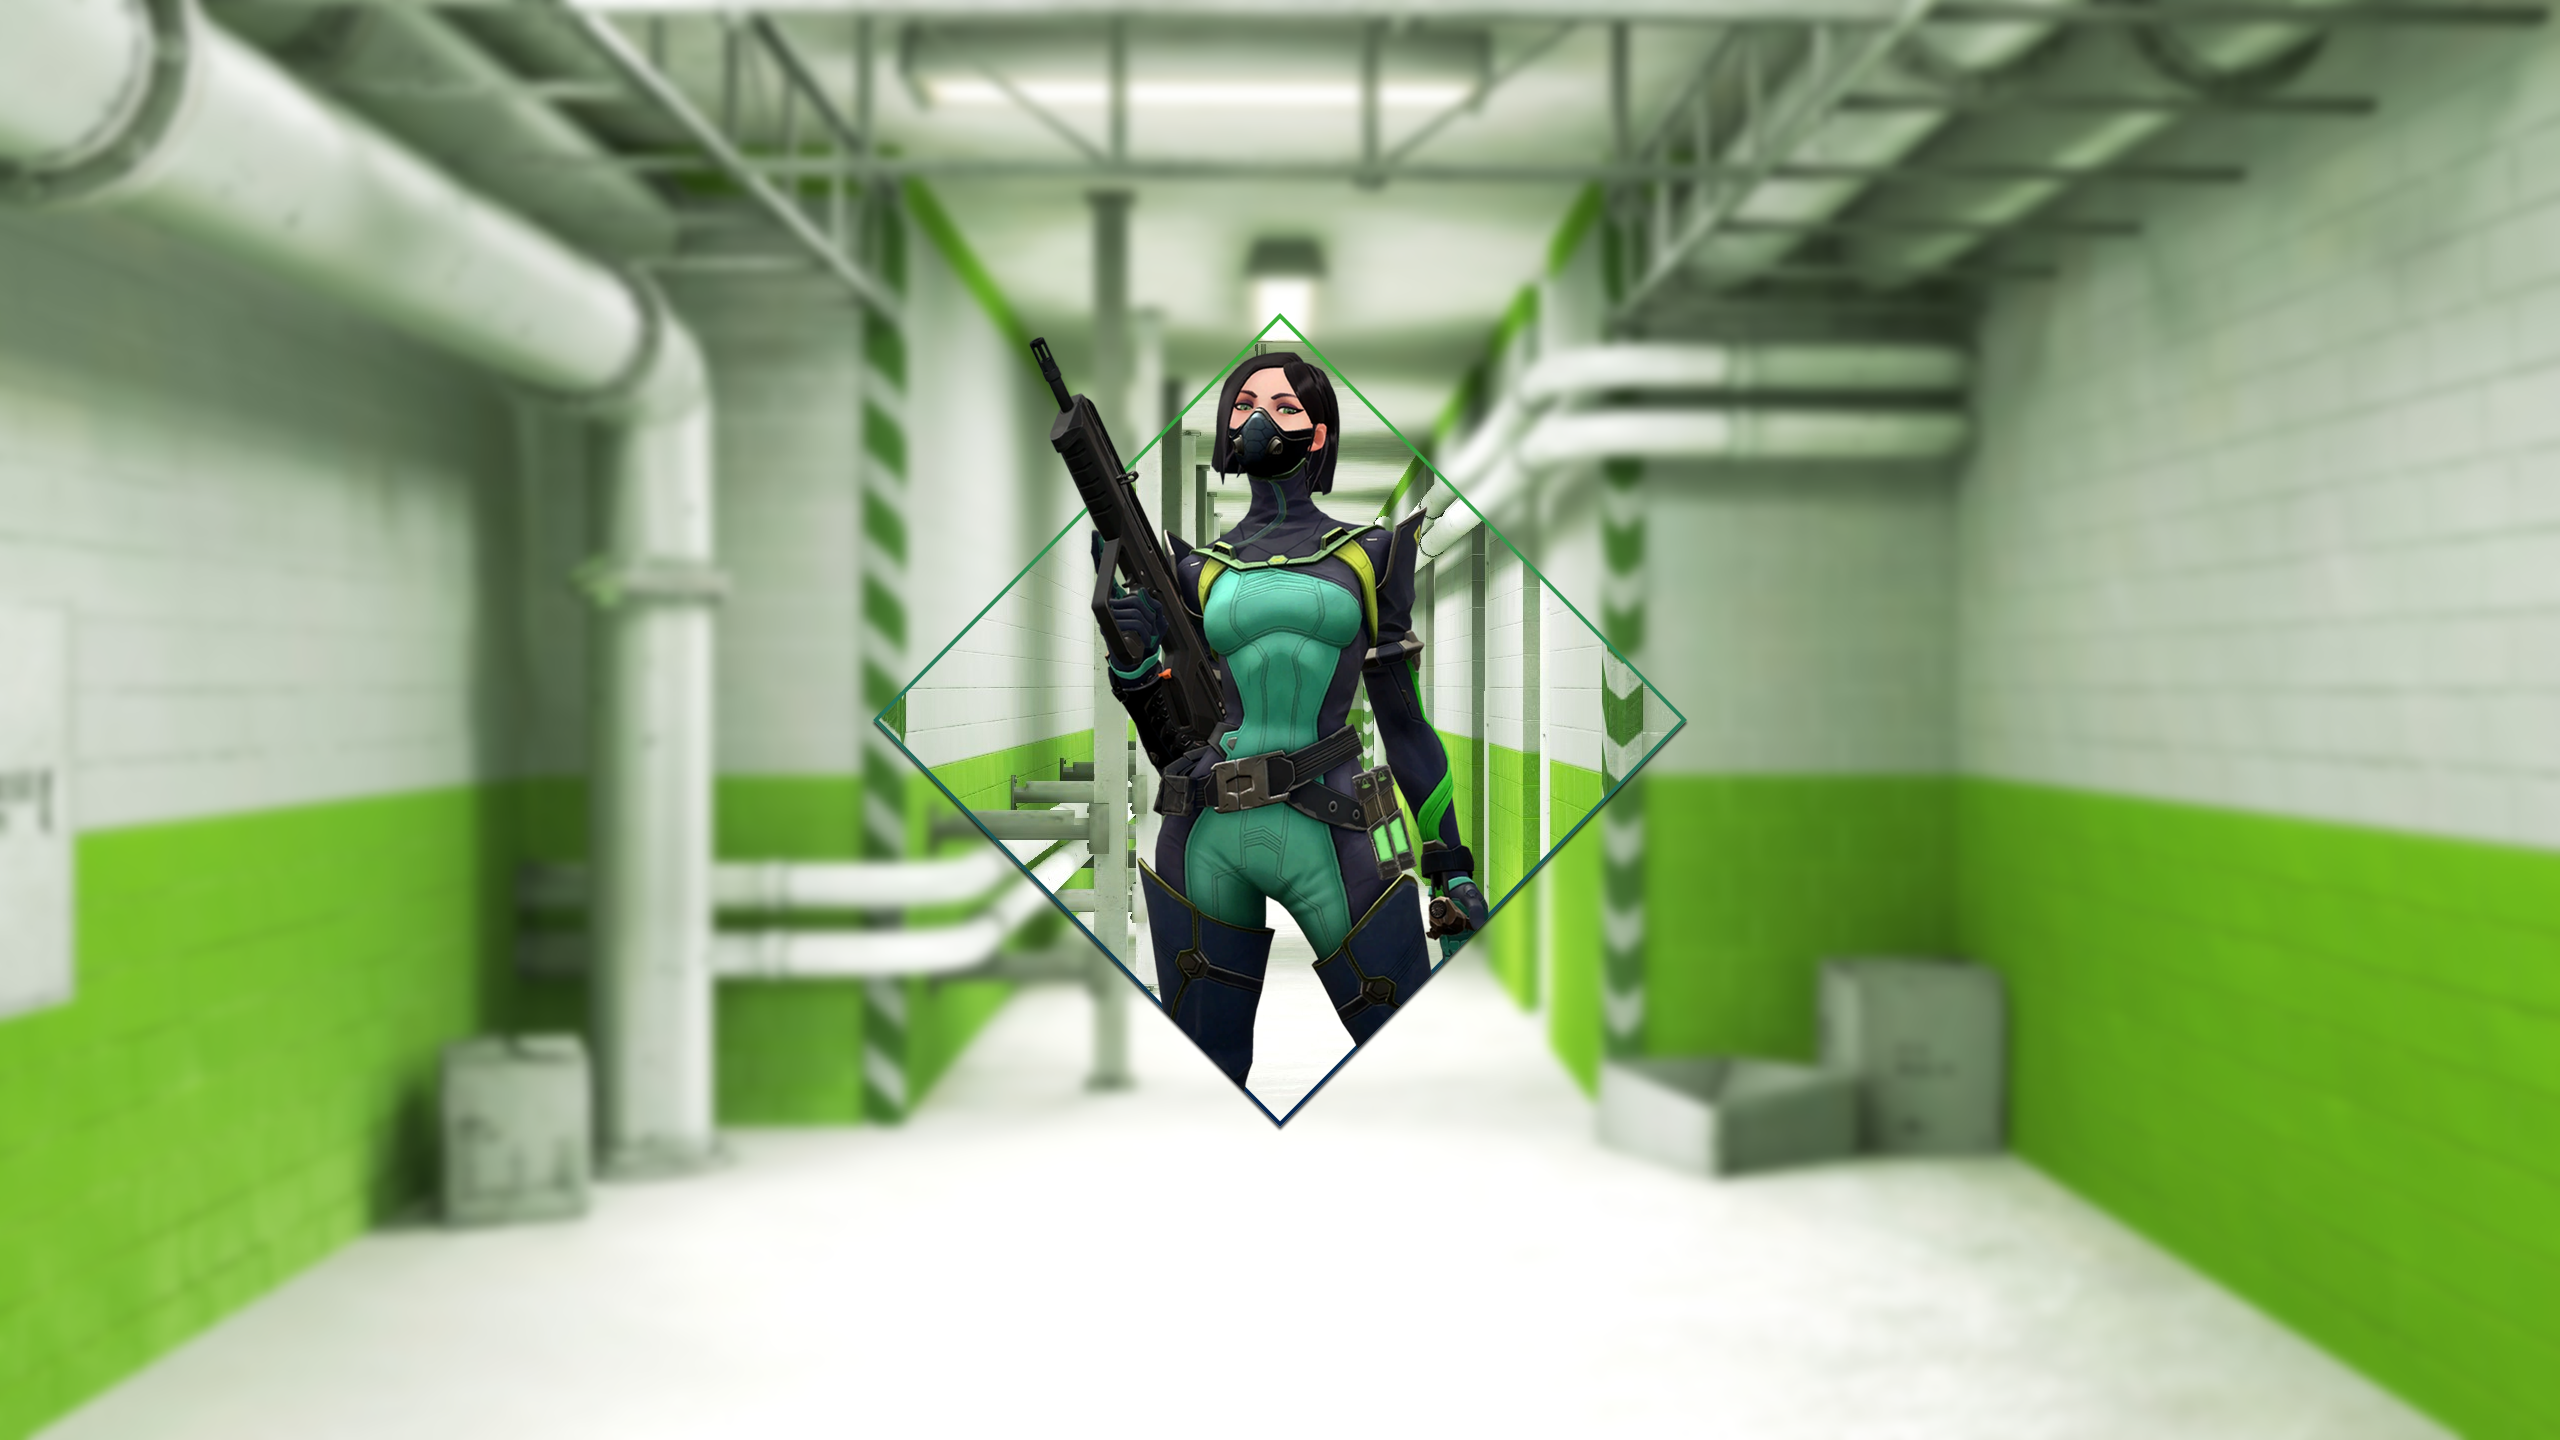 General 2560x1440 viper (valorant) Valorant Mirror's Edge gas masks video games PC gaming video game girls girls with guns dark hair CGI mask picture-in-picture